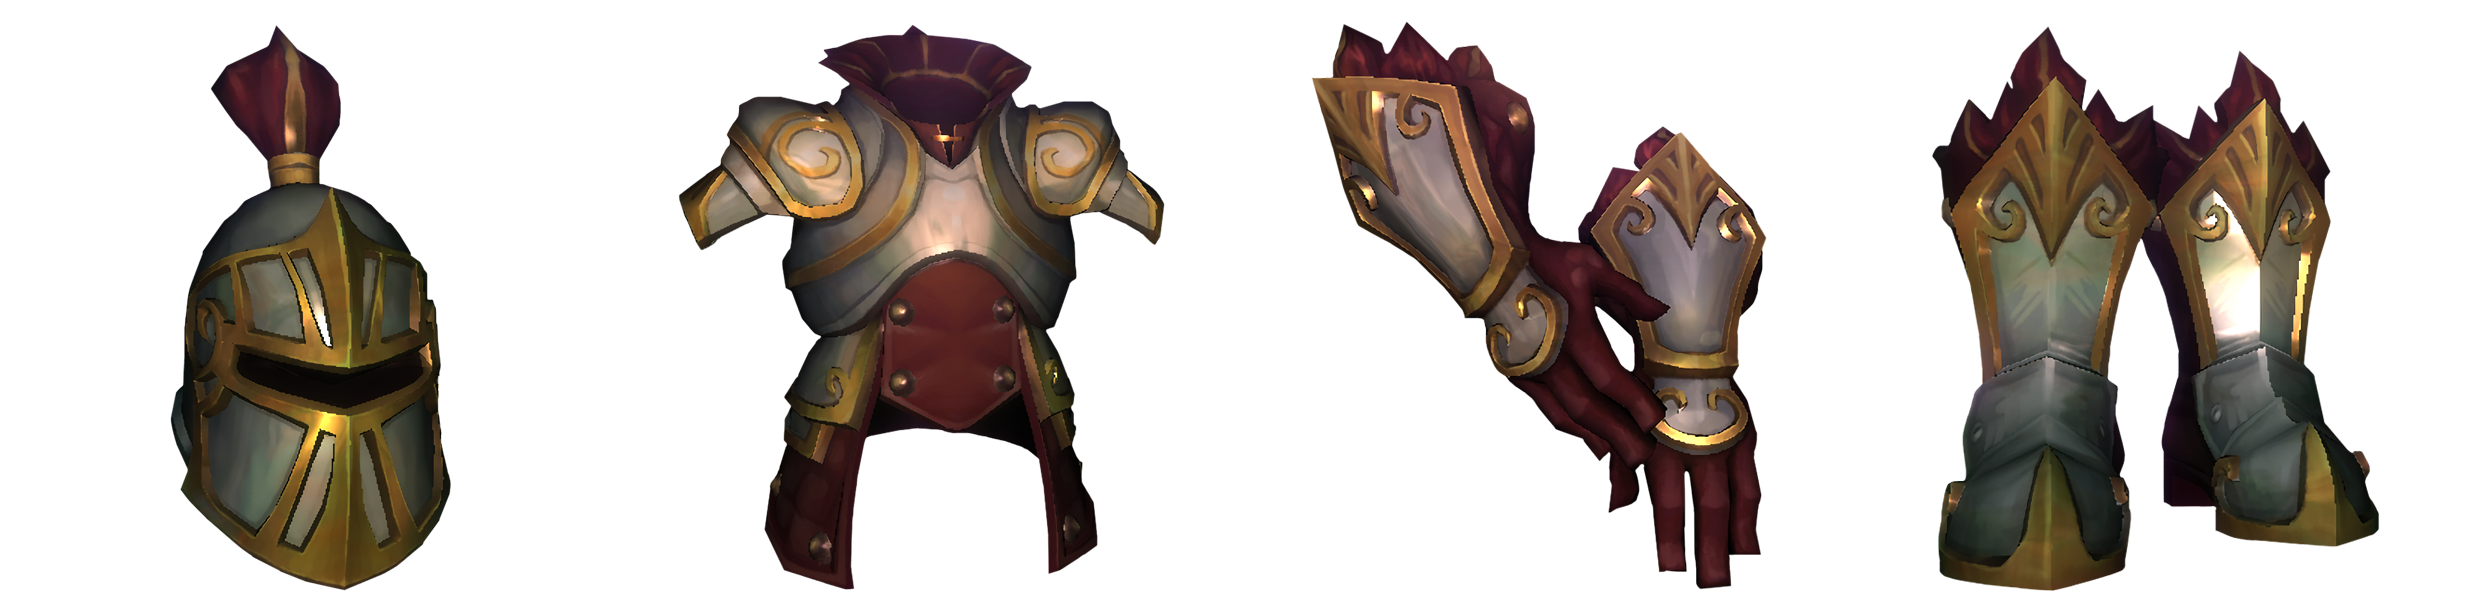 Mythical Armor Set 1.png